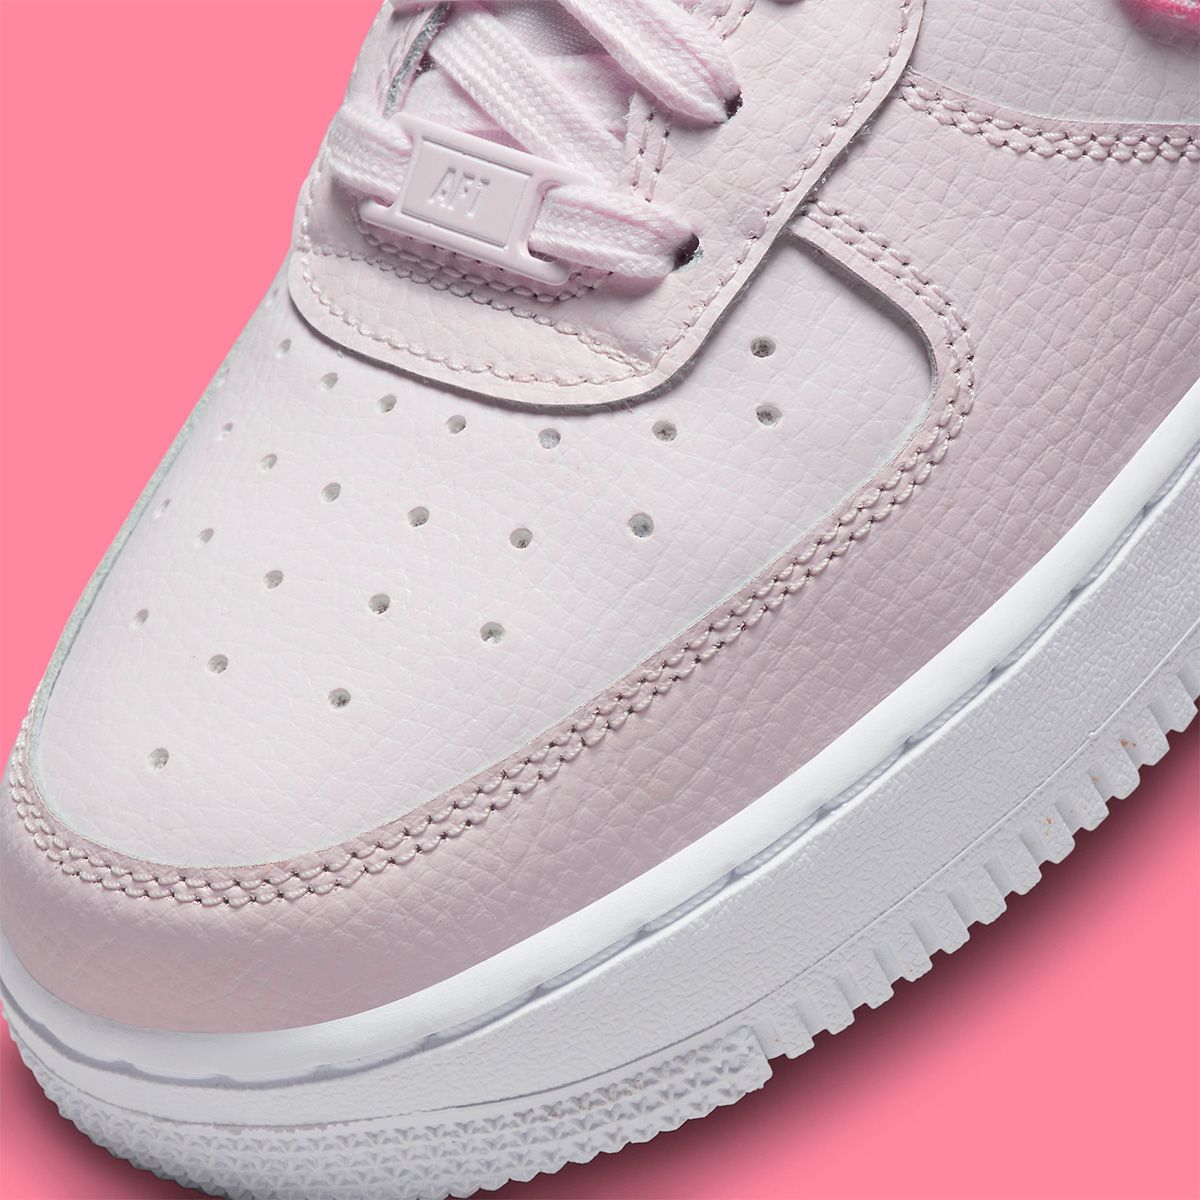 Where to Buy the Nike Air Force 1 Low “Pink Paisley” | House of Heat°